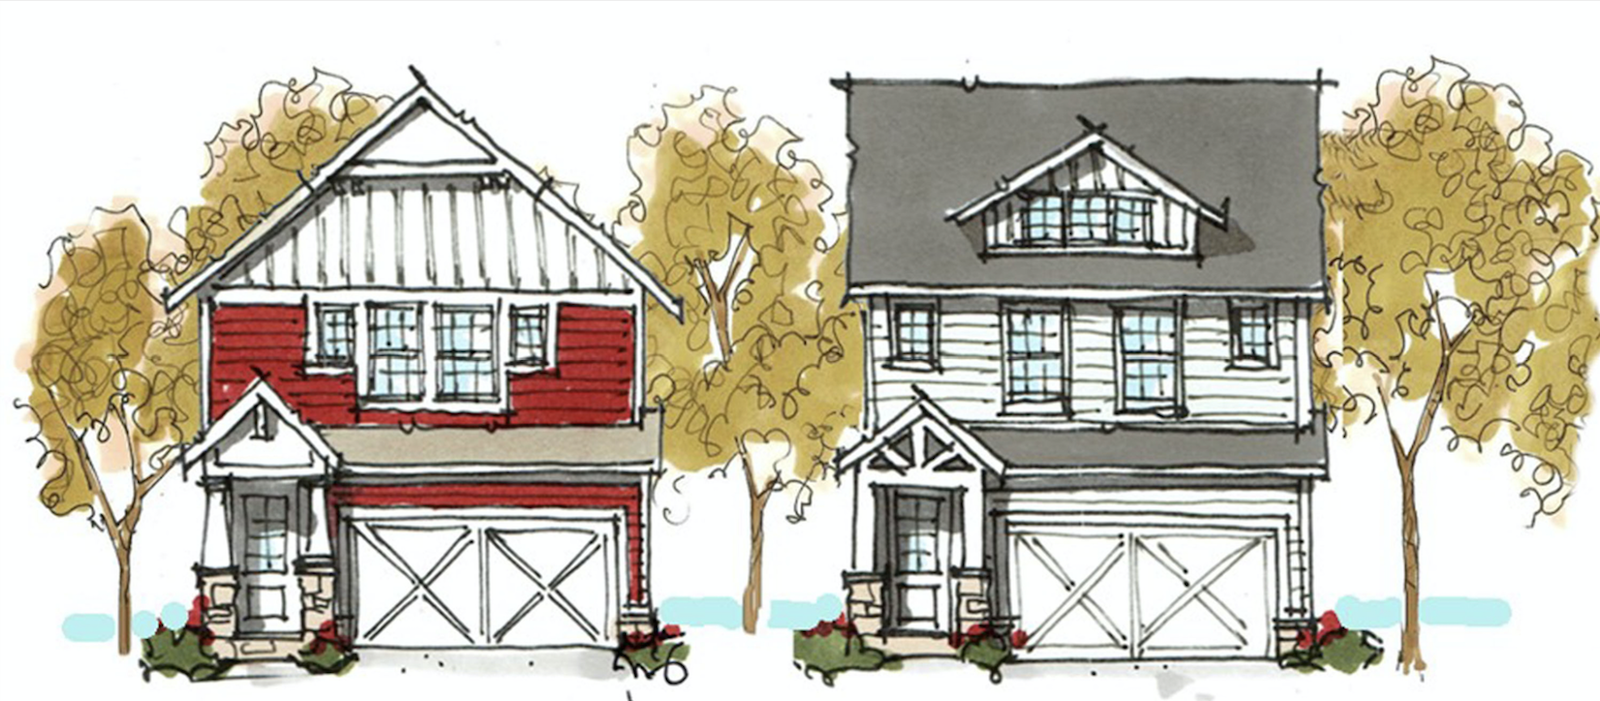 Elevation options for the Catie house plan by TK Design & Associates